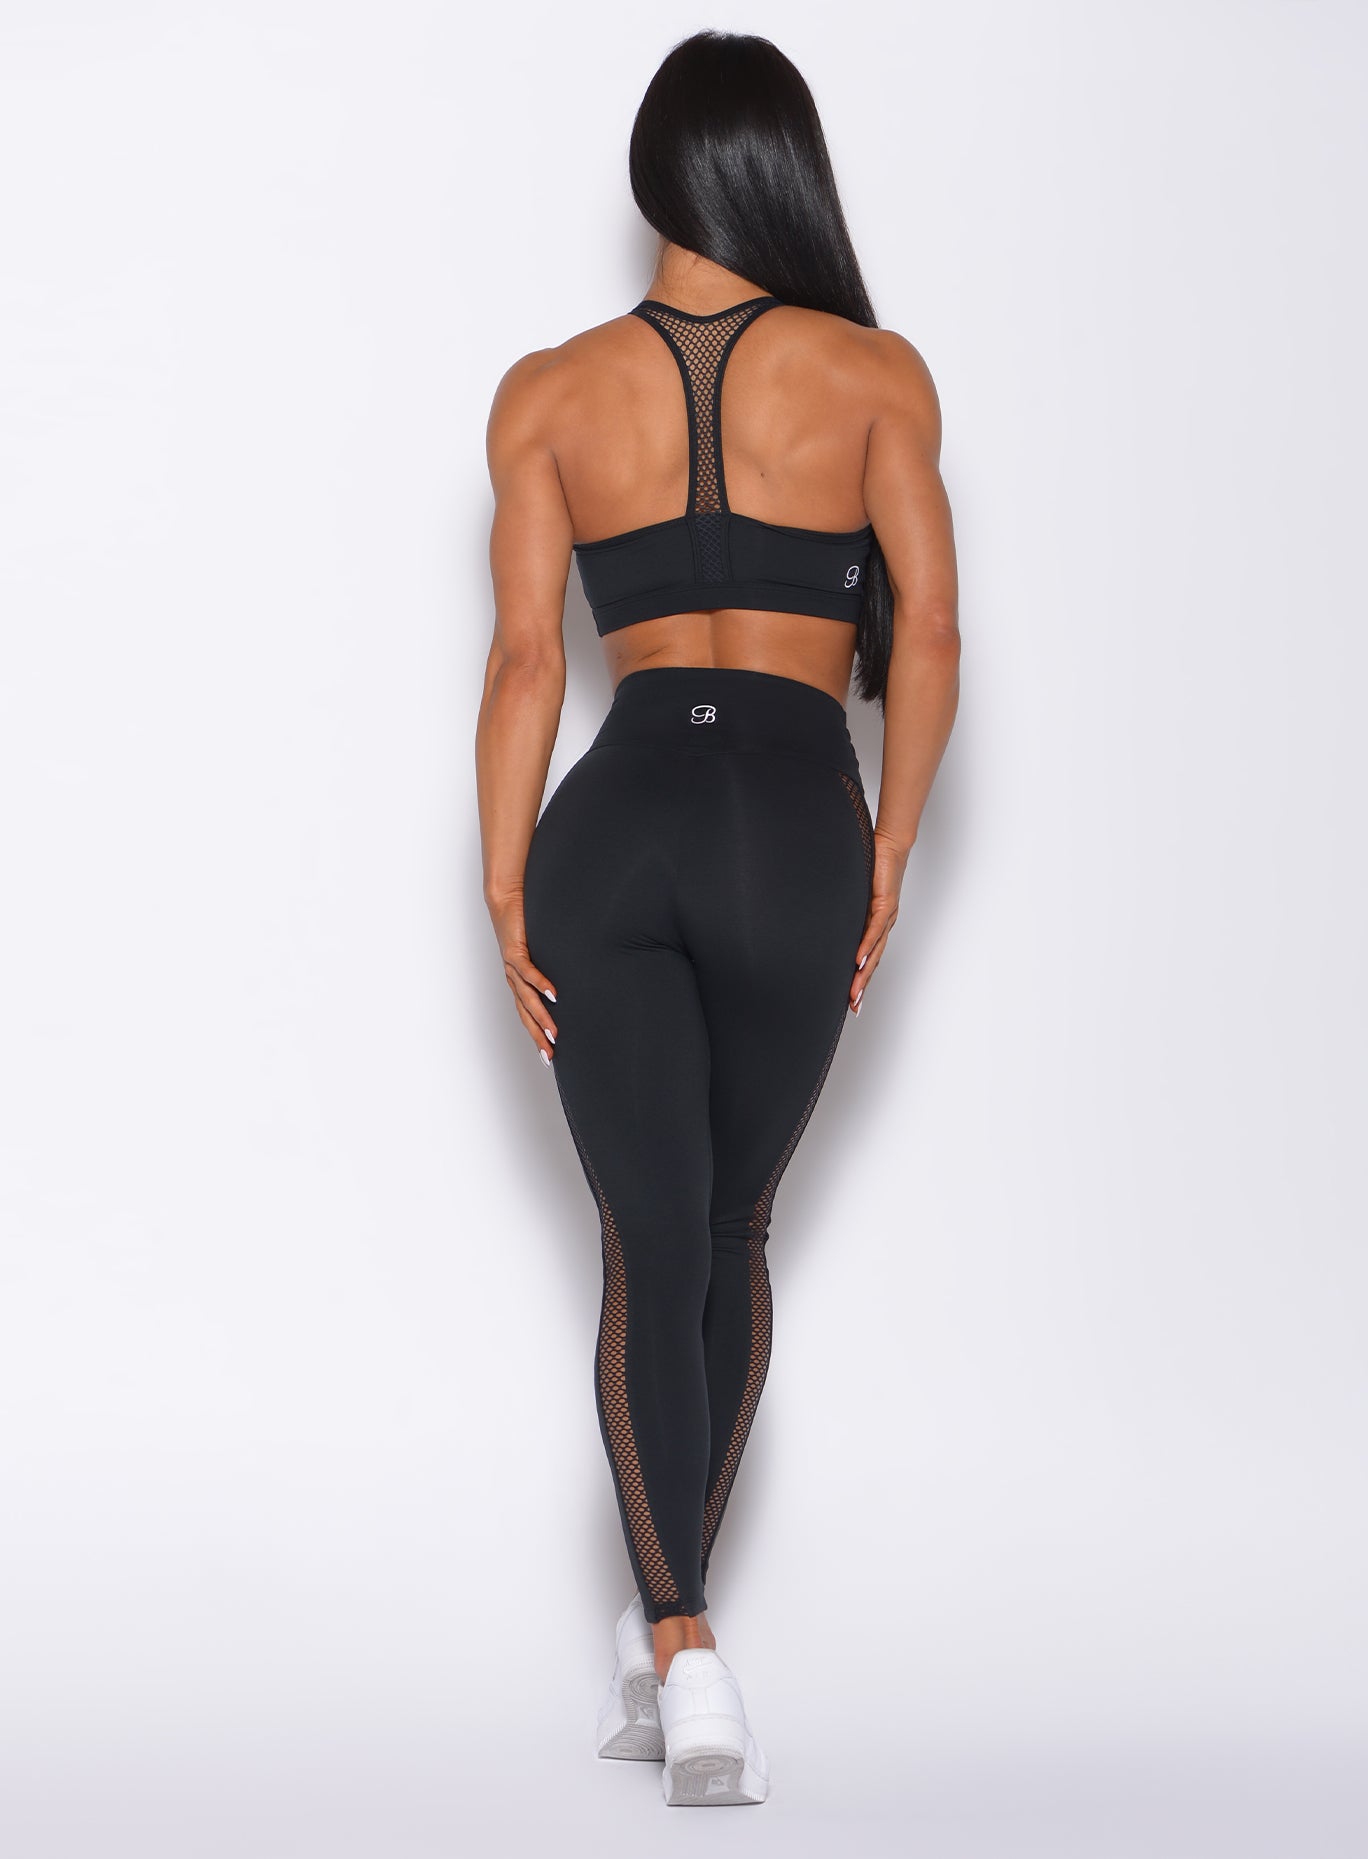 Back profile view of a model in our black Mohawk leggings and a matching bra